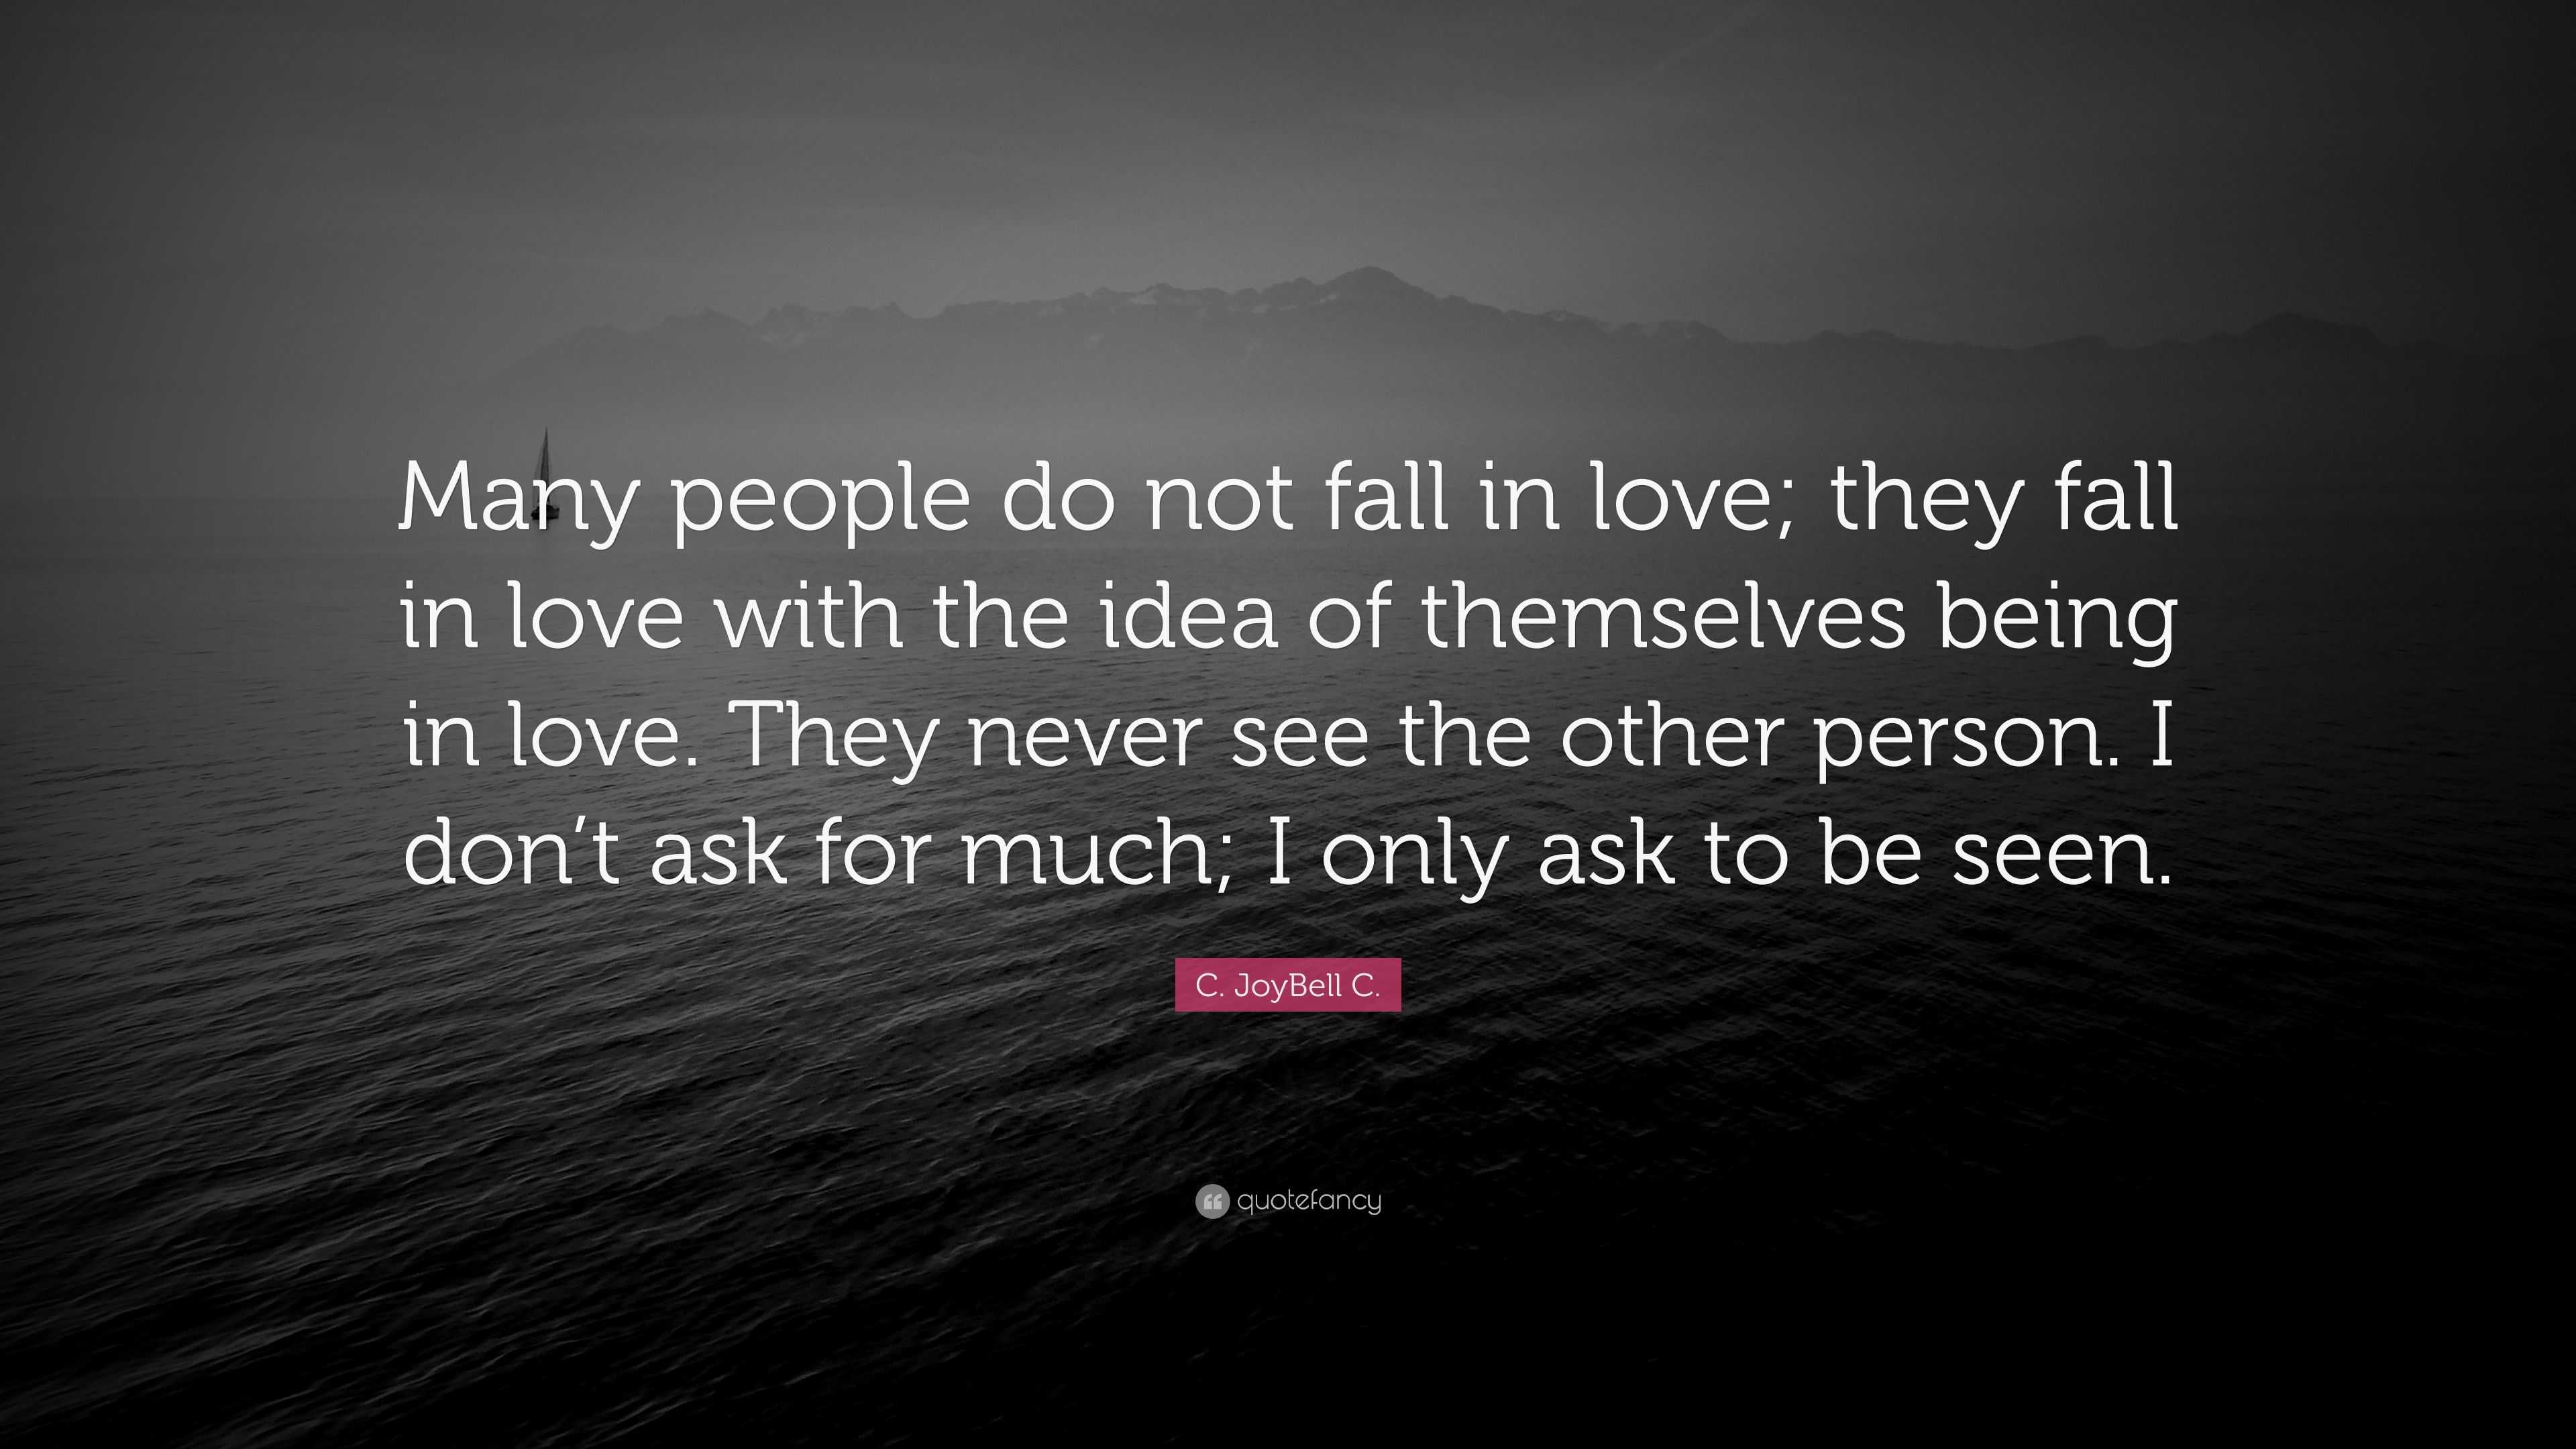 C JoyBell C Quote “Many people do not fall in love